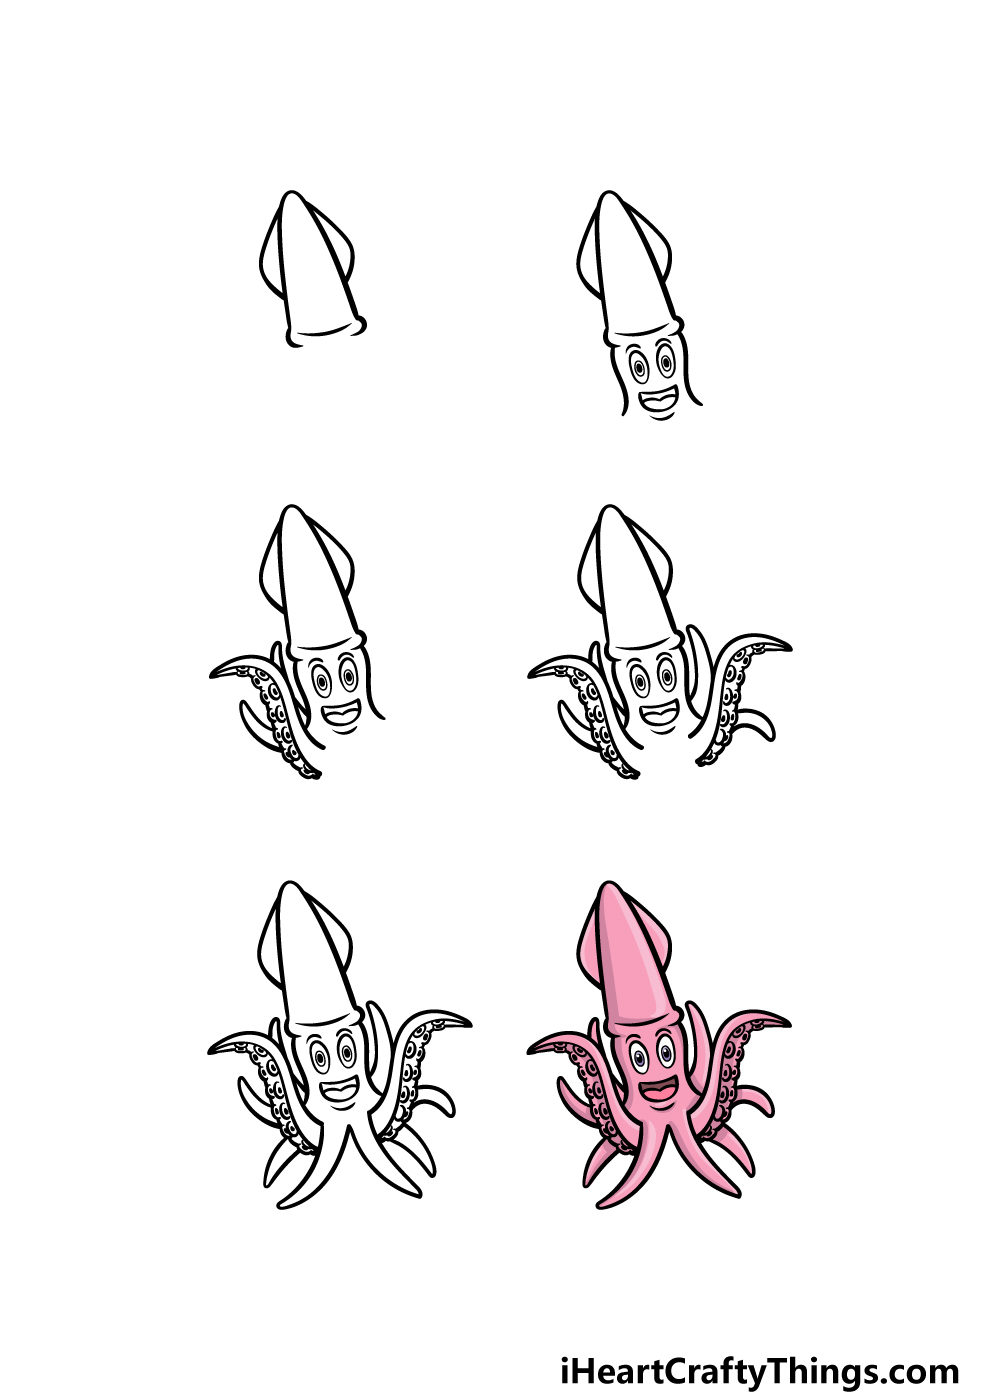 how to draw a cartoon squid in 6 steps